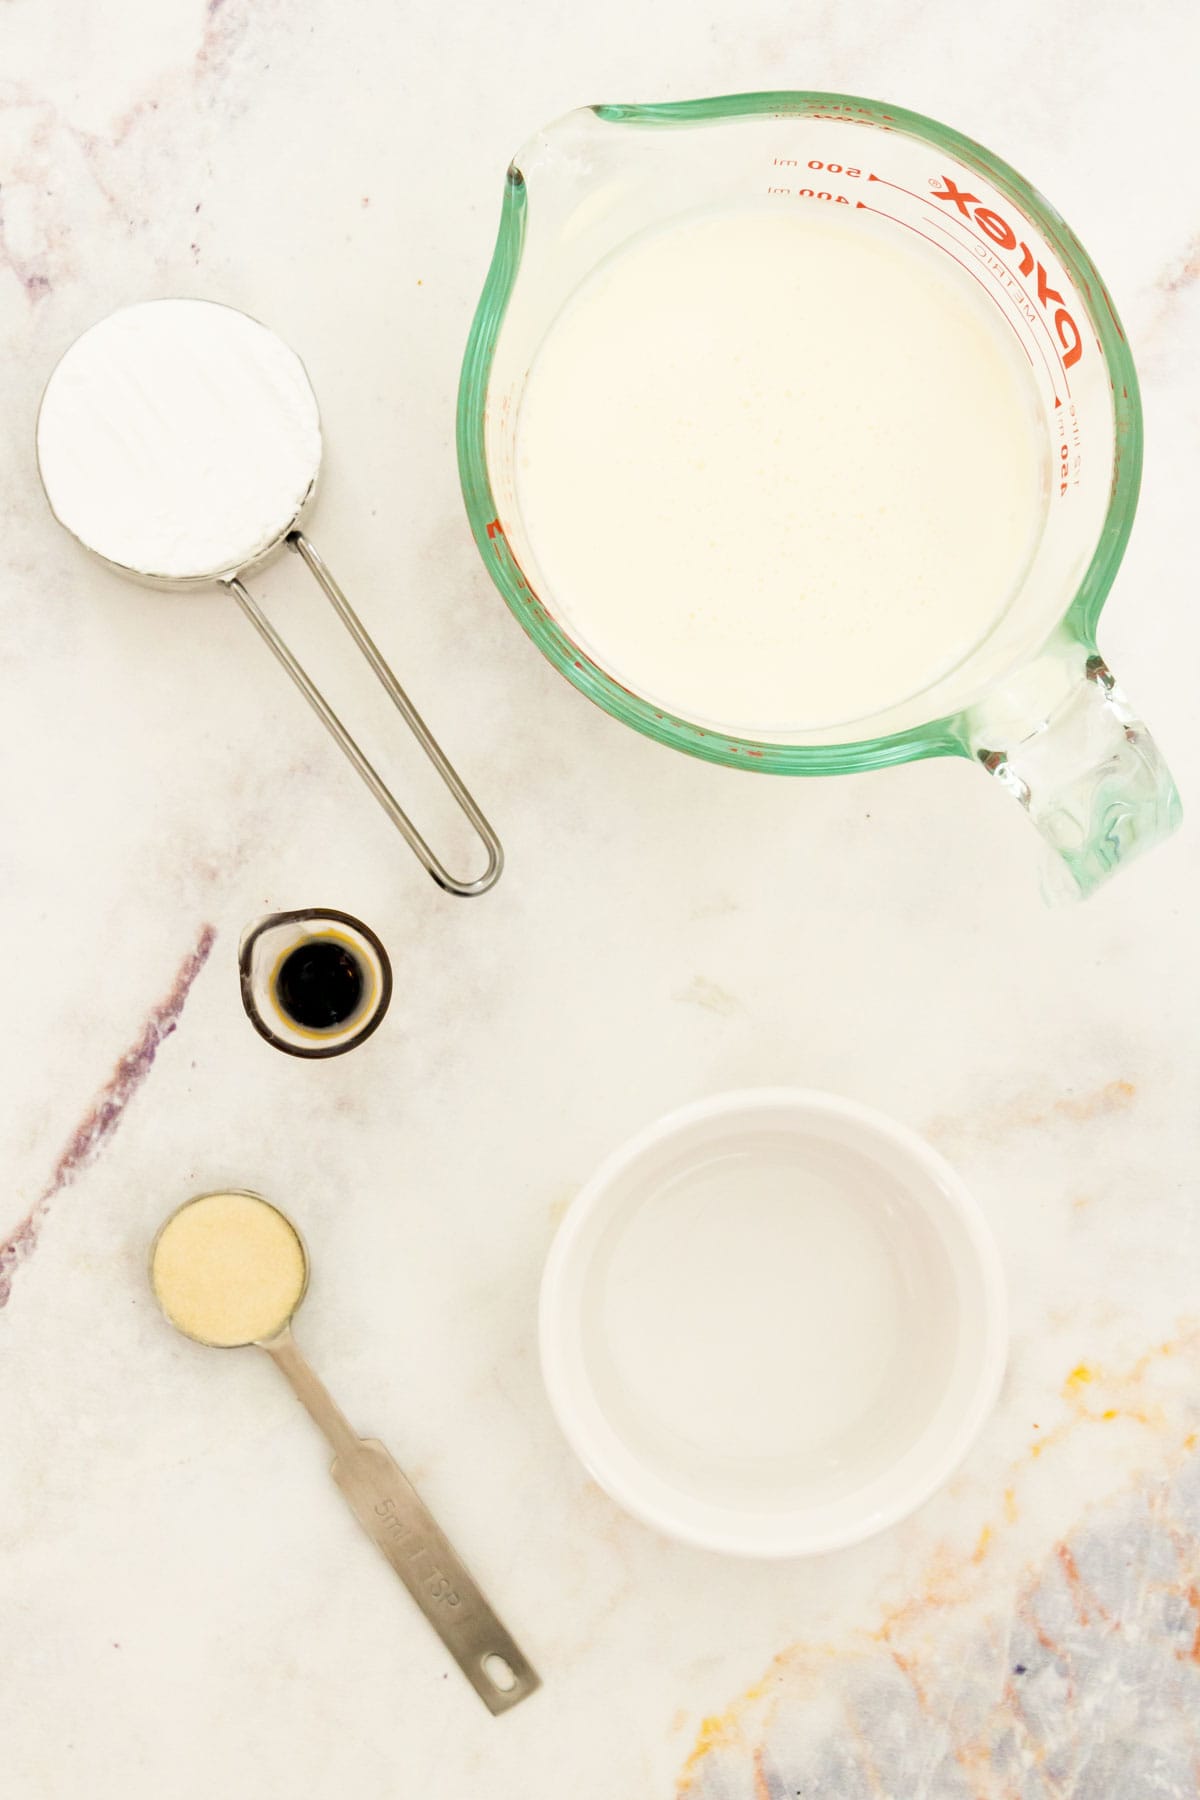 Bowls and measuring spoons of whipped cream frosting ingredients.